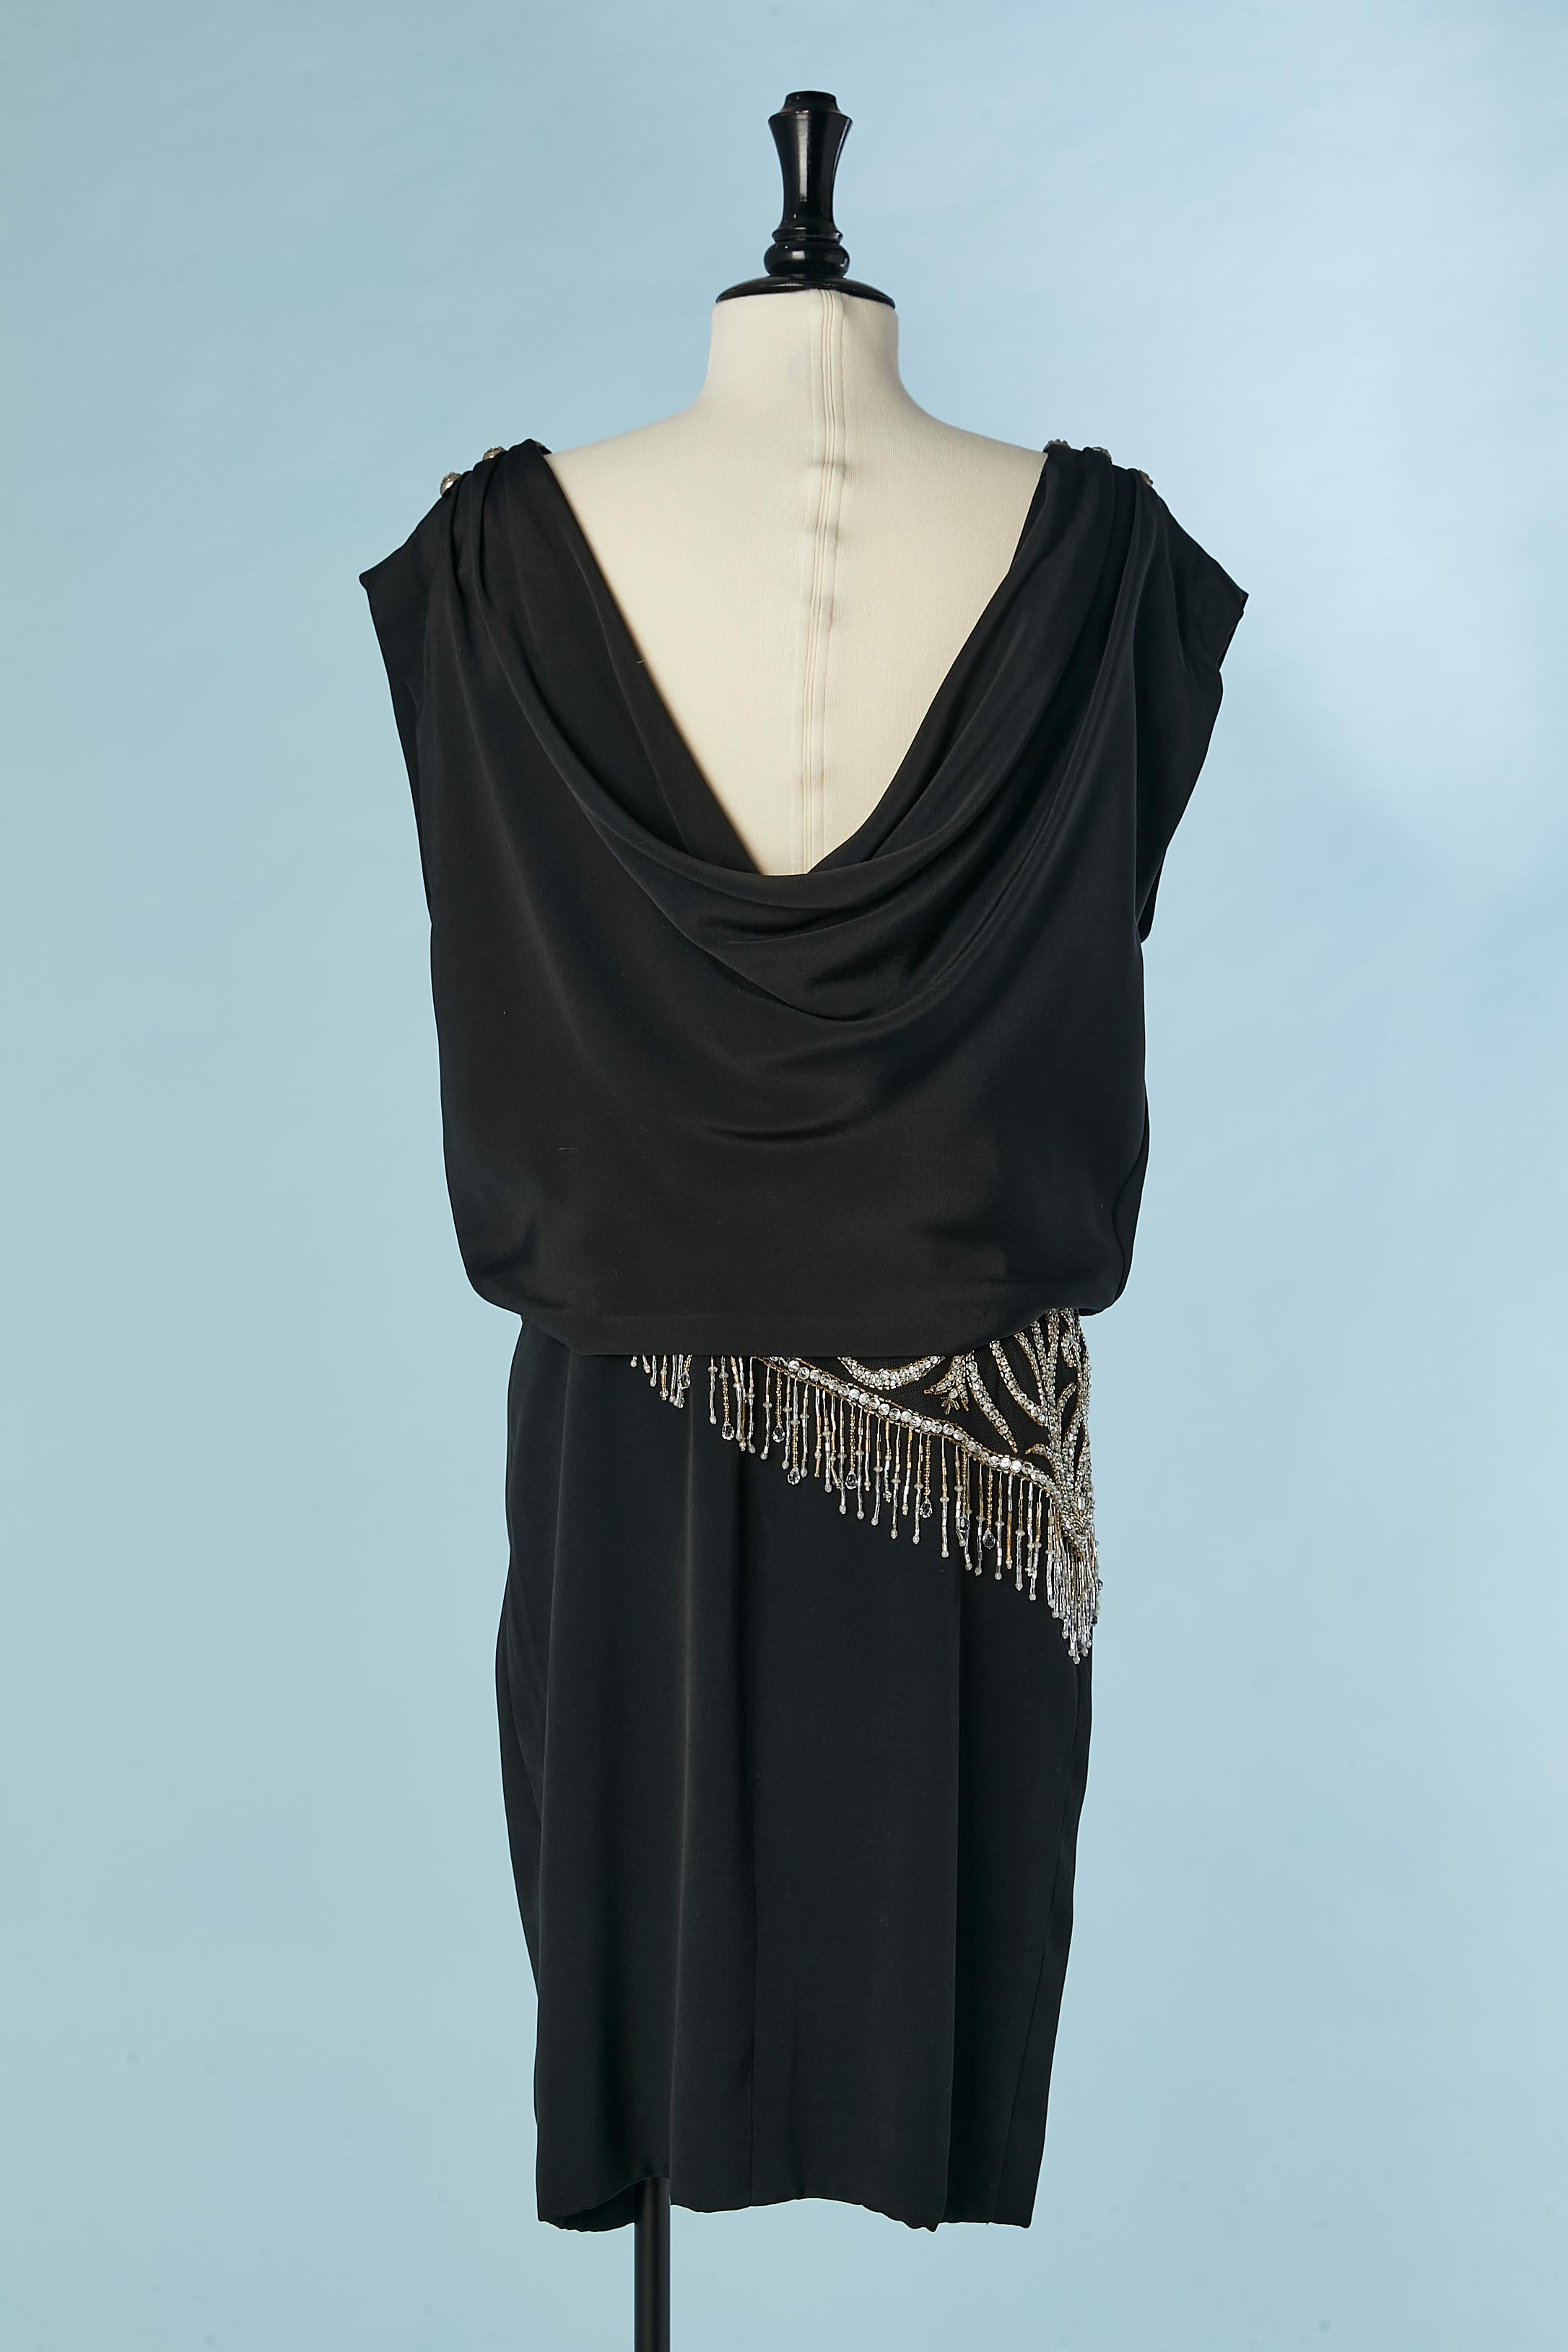 Black  cocktail dress with rhinestone and beads Bob Mackie for Nieman Marcus For Sale 2